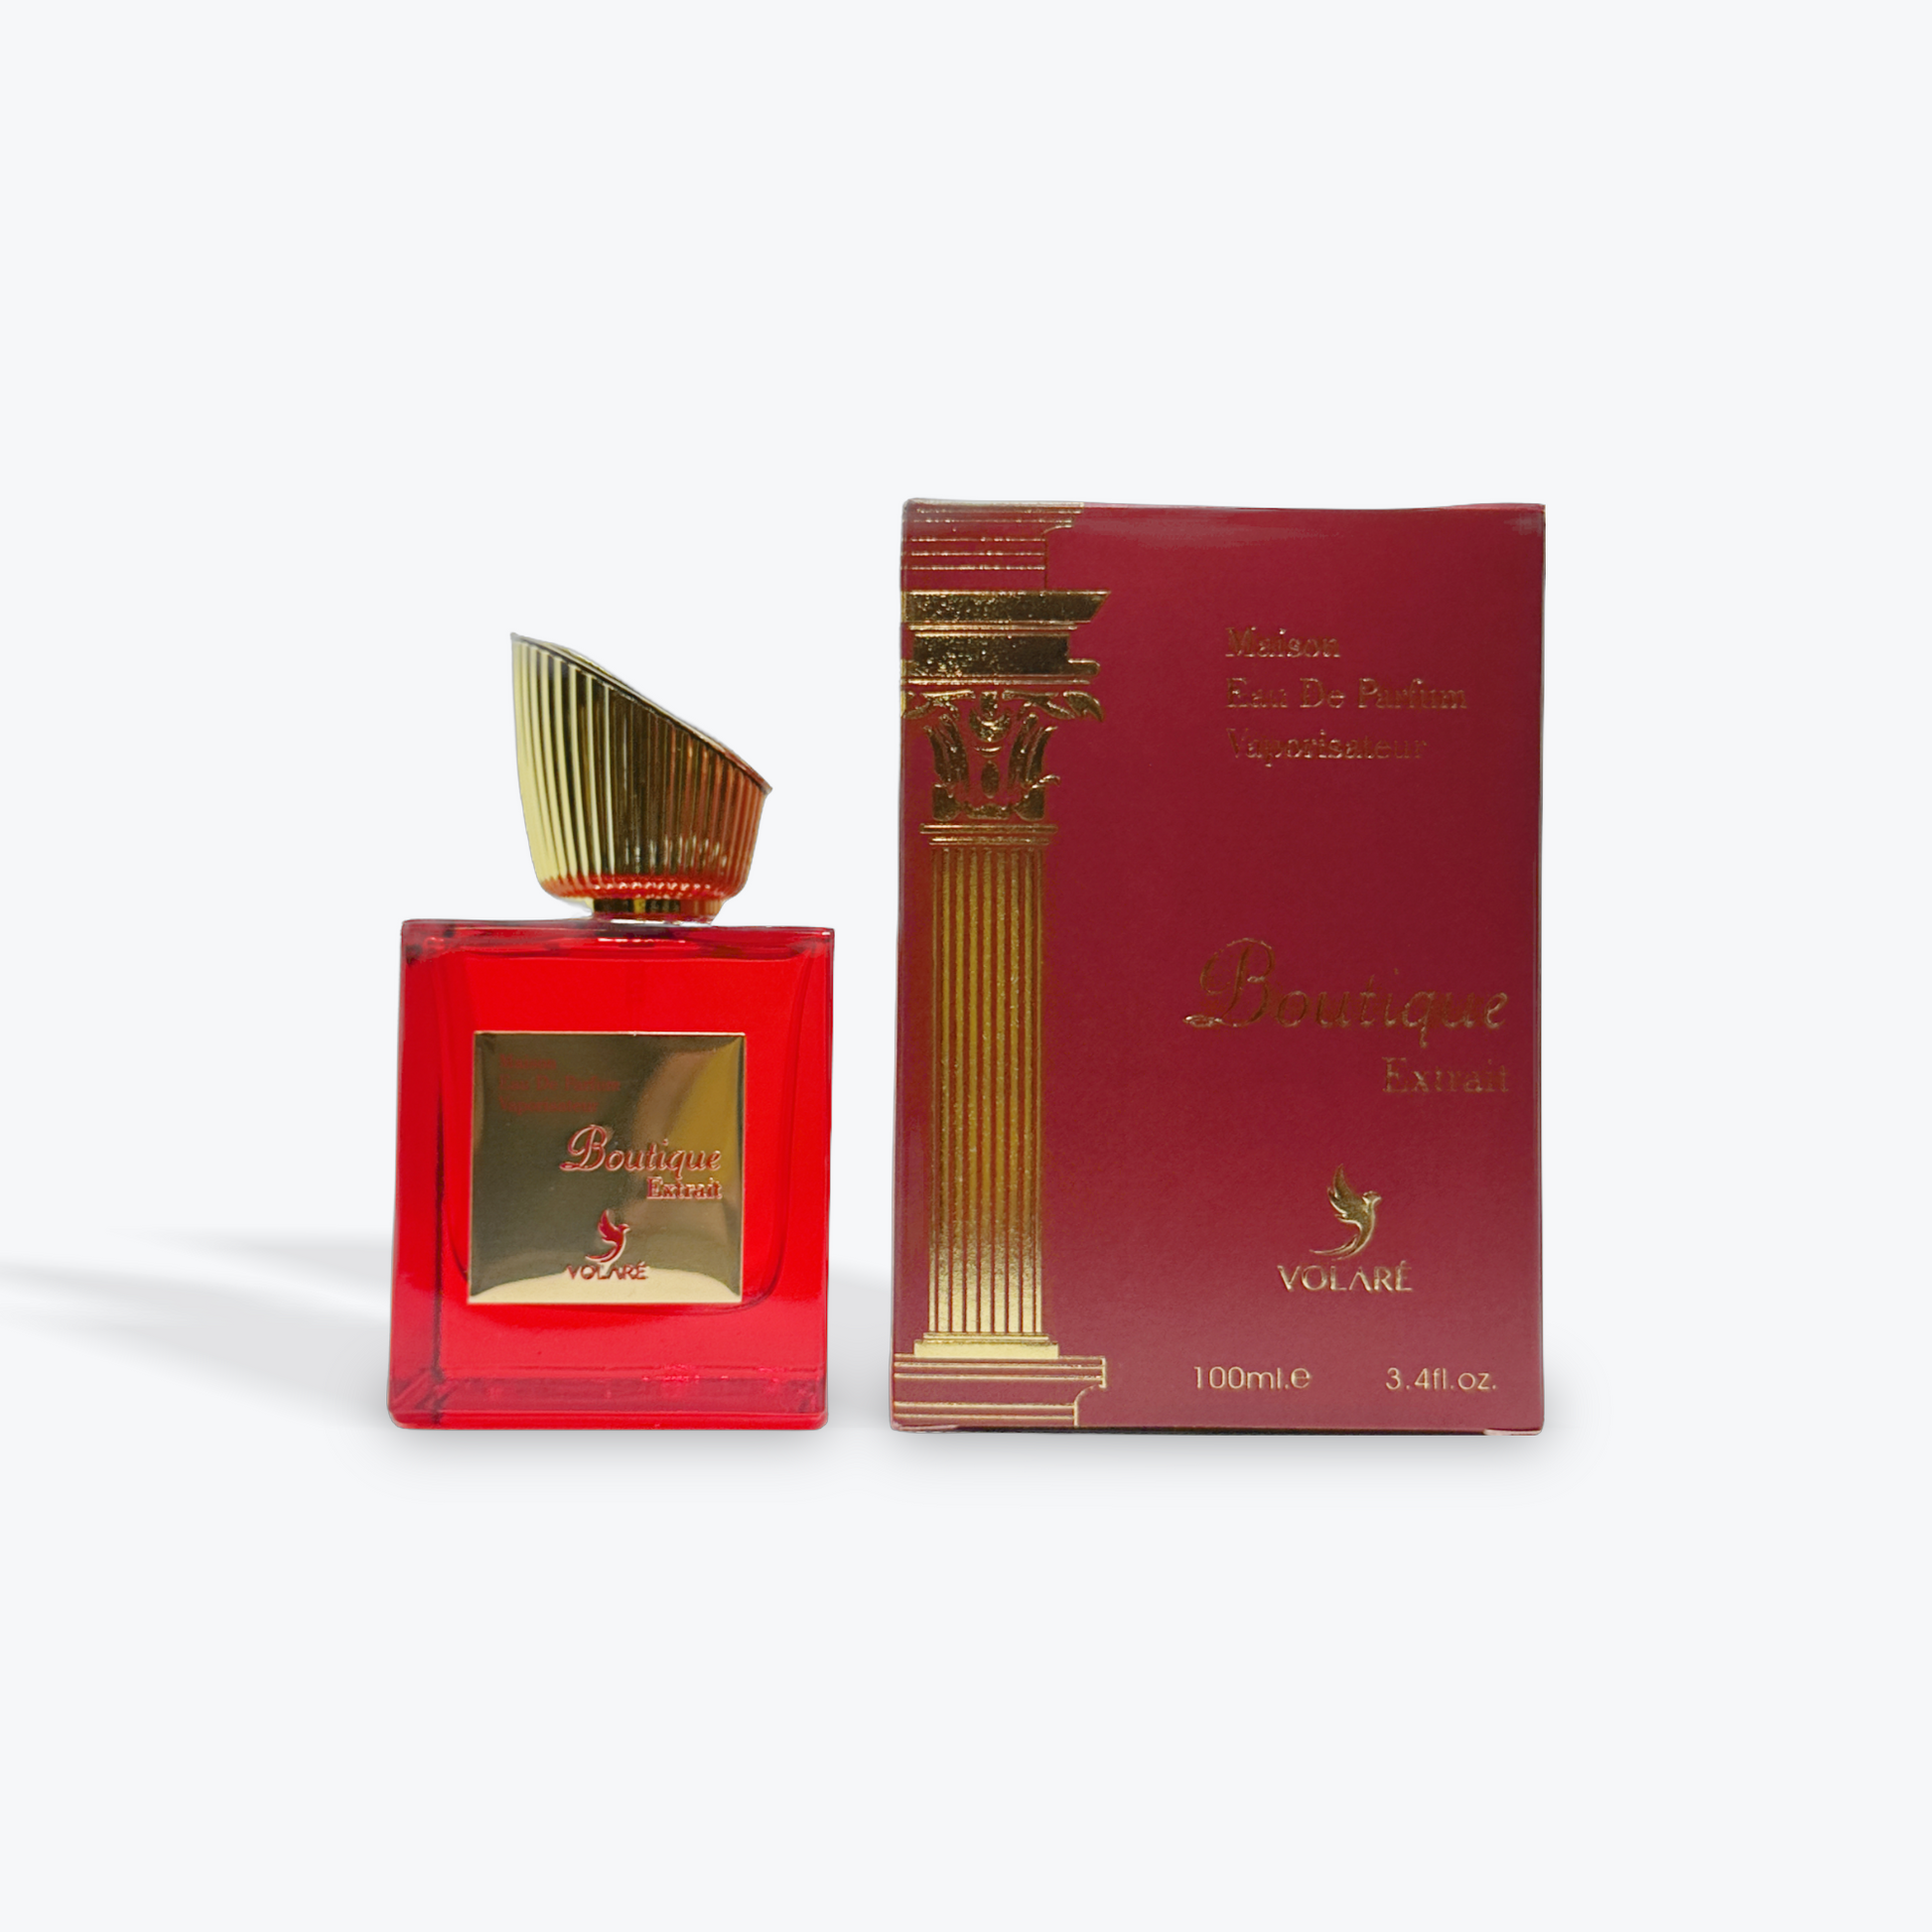 Boutique Extrait EDP by Volare 100ml – Madina Islamic Bookstore